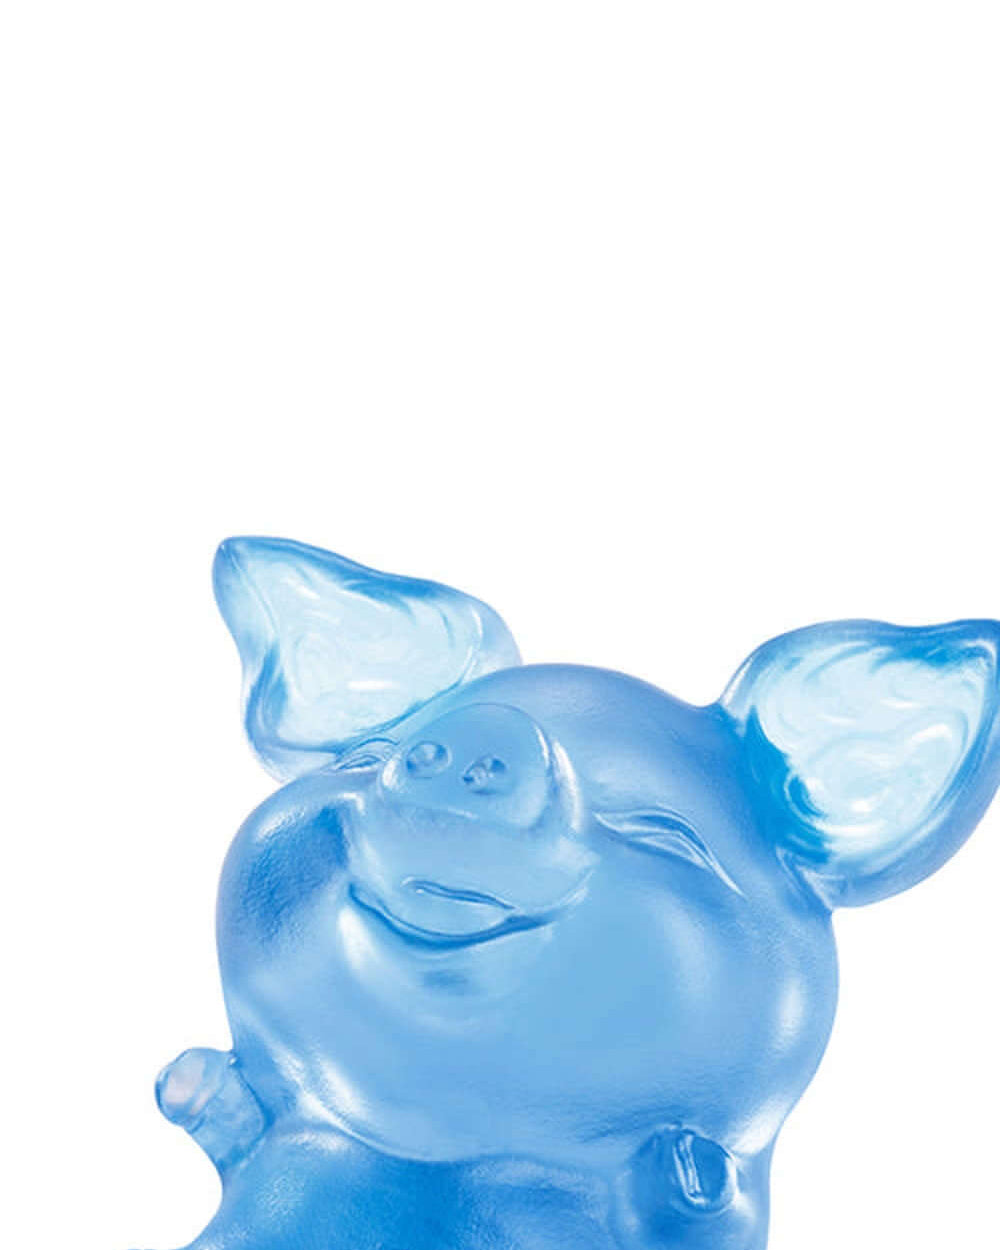 LIULI Crystal Art Chinese Year of the Pig Crystal Sculpture, One and the Same- Happy Go Lucky